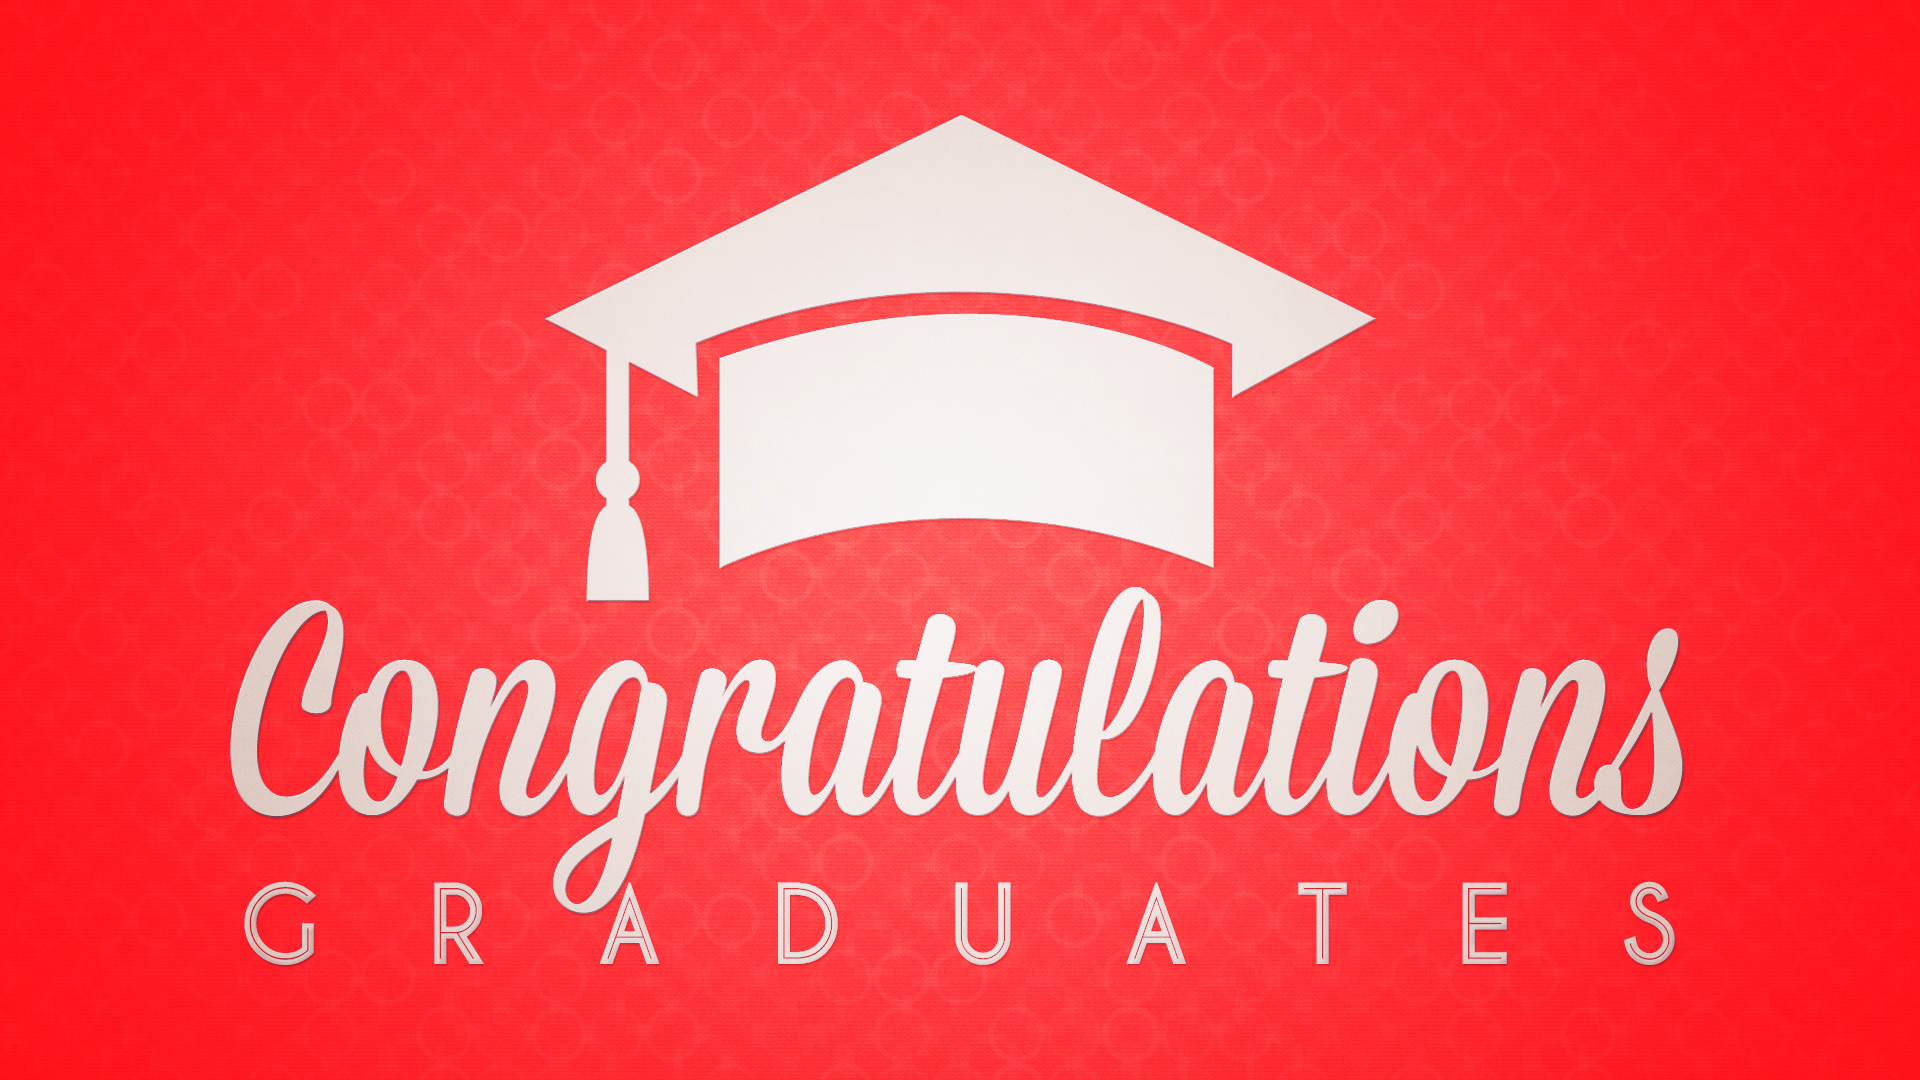 Congratulations Pictures Free Download for Graduates